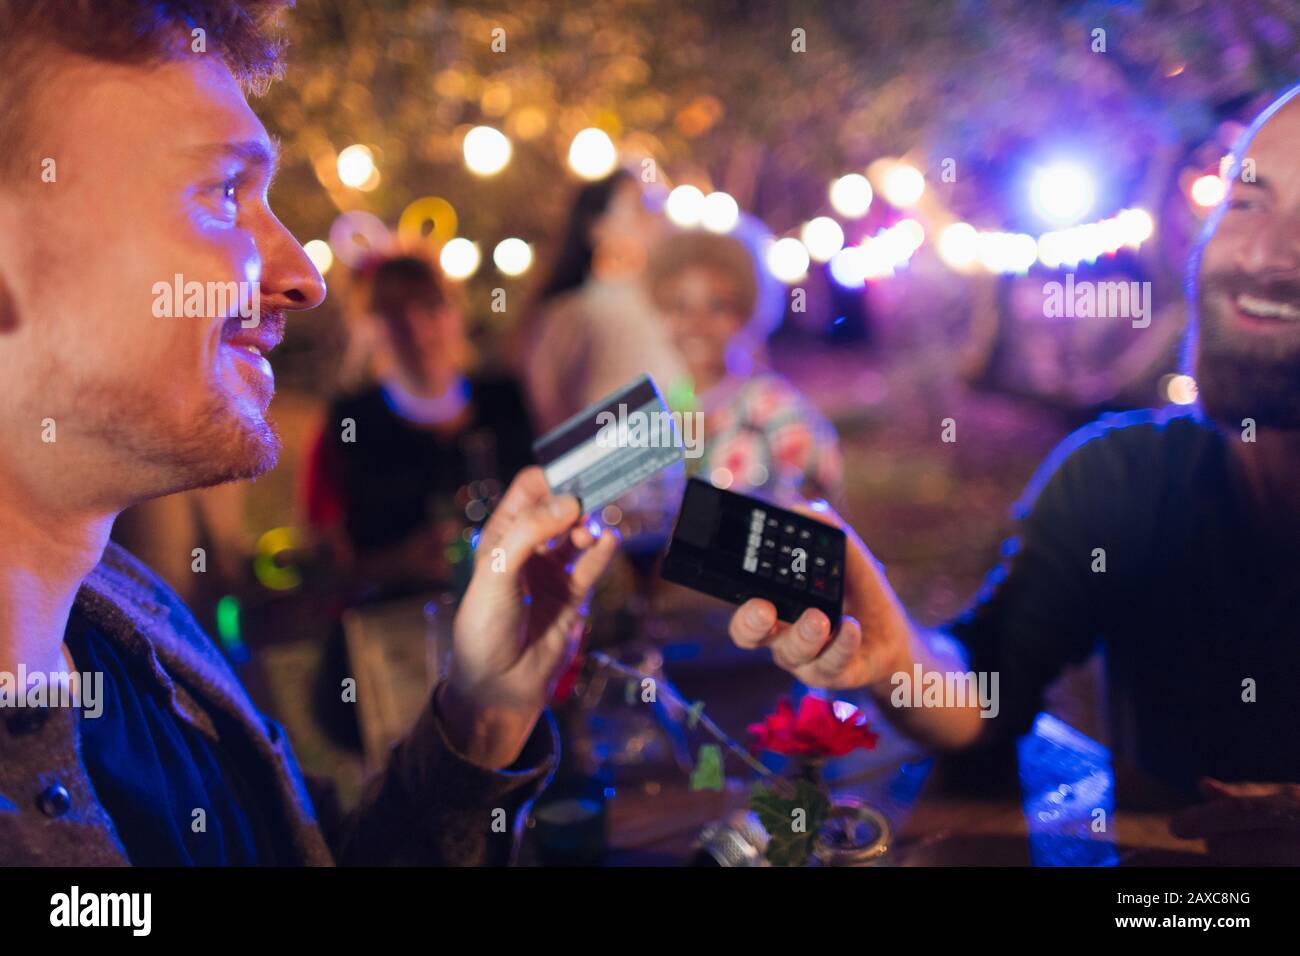 Man with credit card paying bartender at party Stock Photo